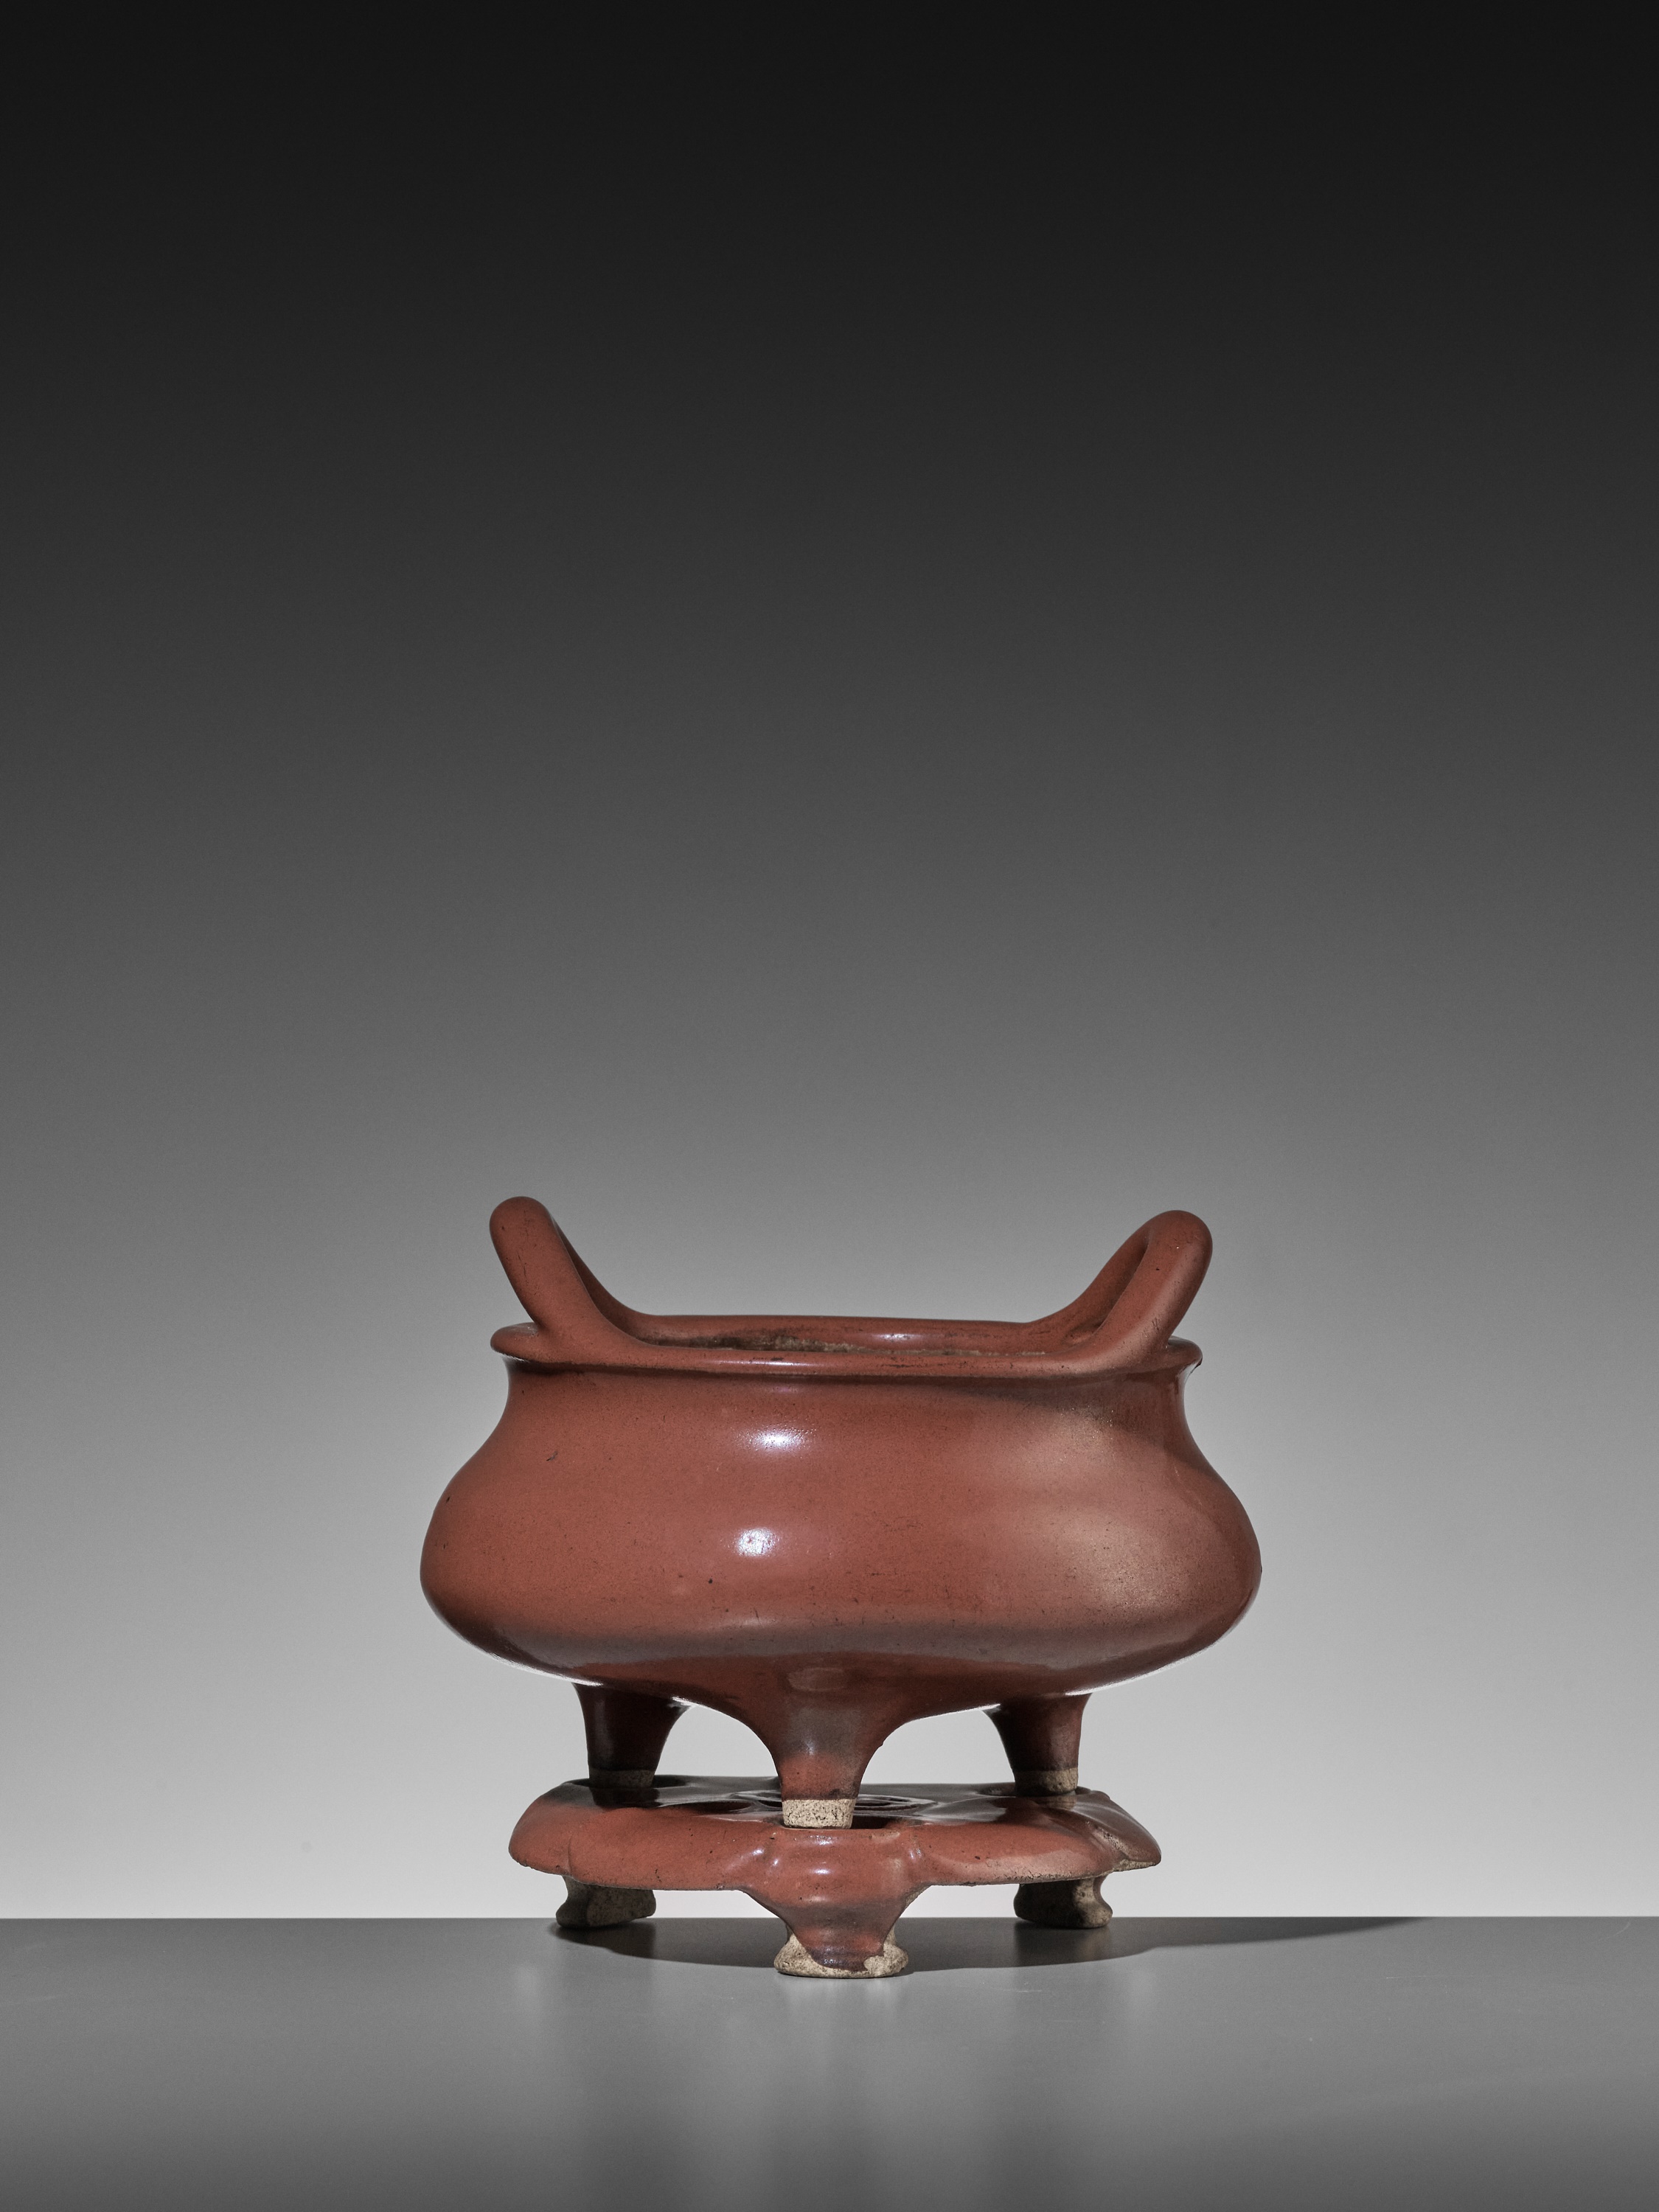 A RARE IRON-RUST GLAZED TRIPOD CENSER WITH MATCHING STAND, MID-QING - Image 3 of 12